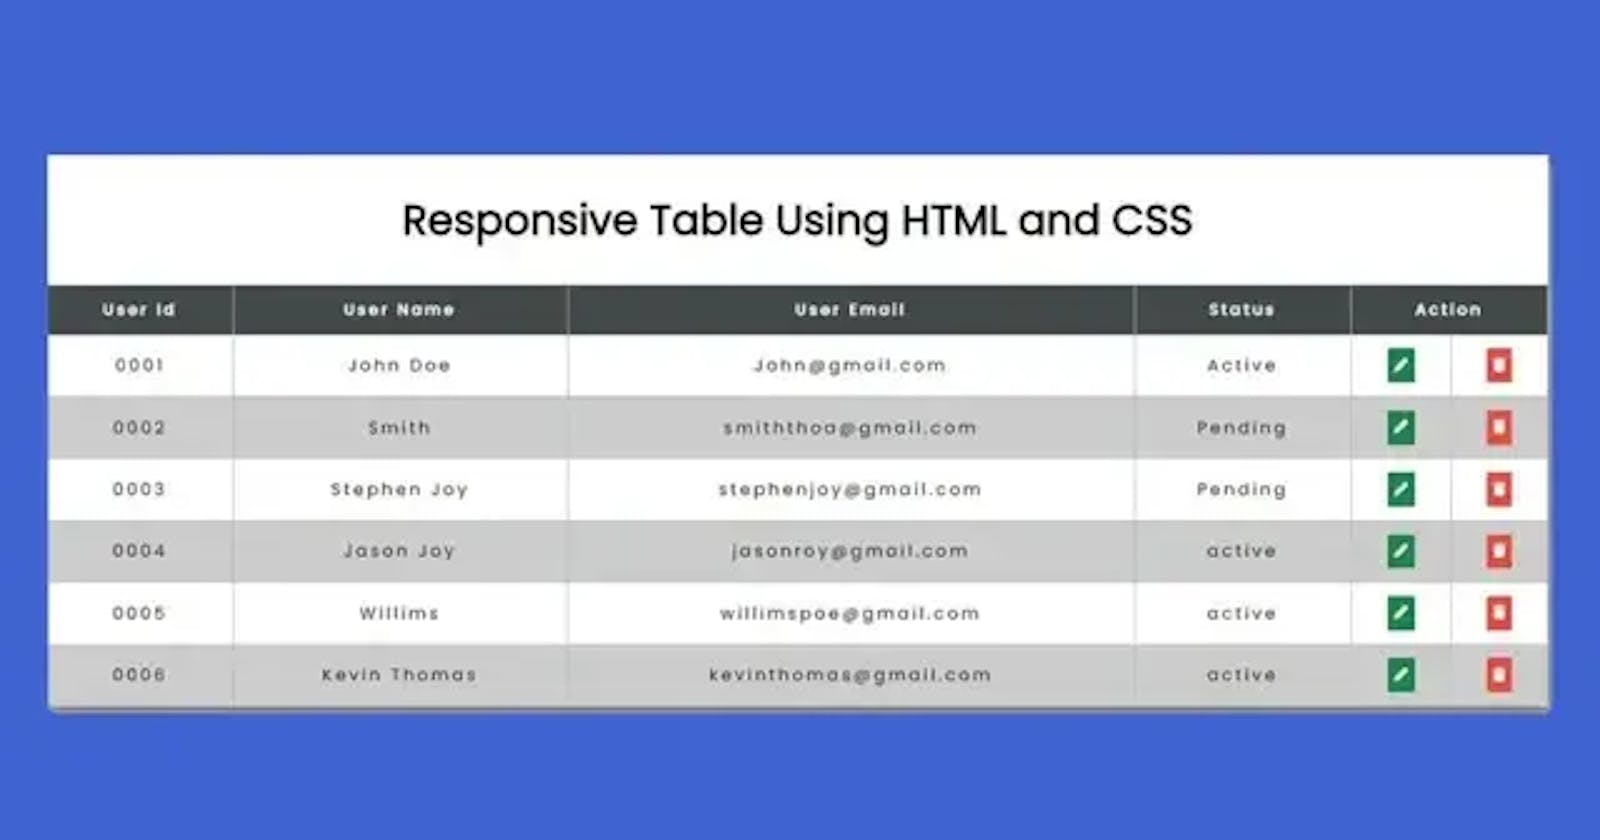 How to Make a Responsive Table in HTML and CSS